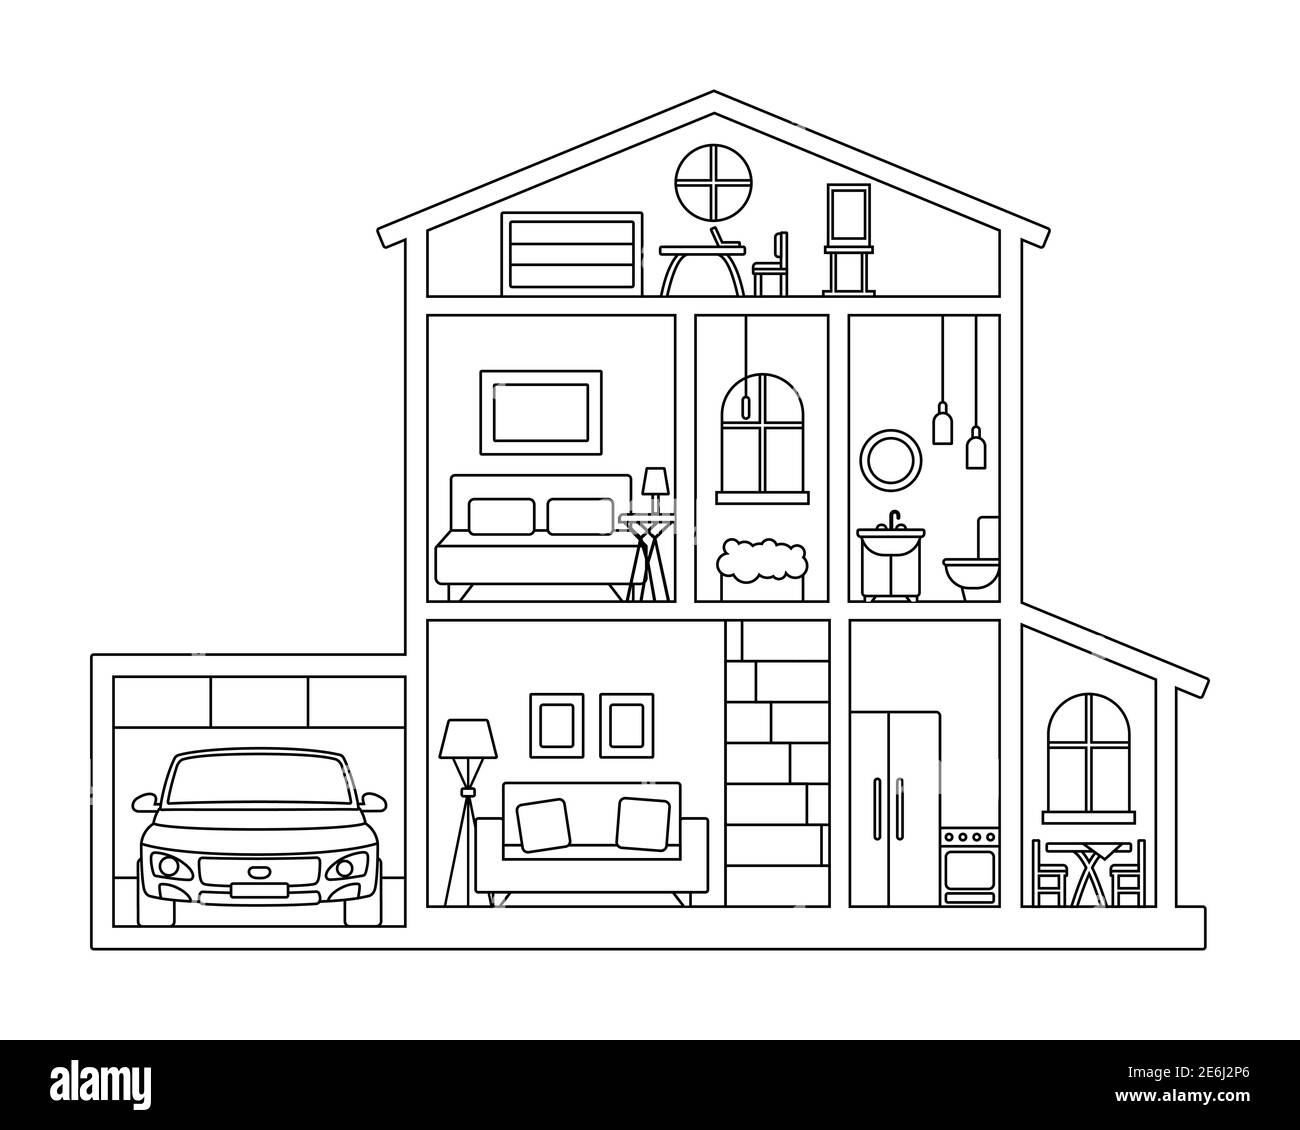 Illustration for coloring book - Cross section of cottage house with furniture, attic and car in garage. Inside paper house - contour black and white Stock Vector